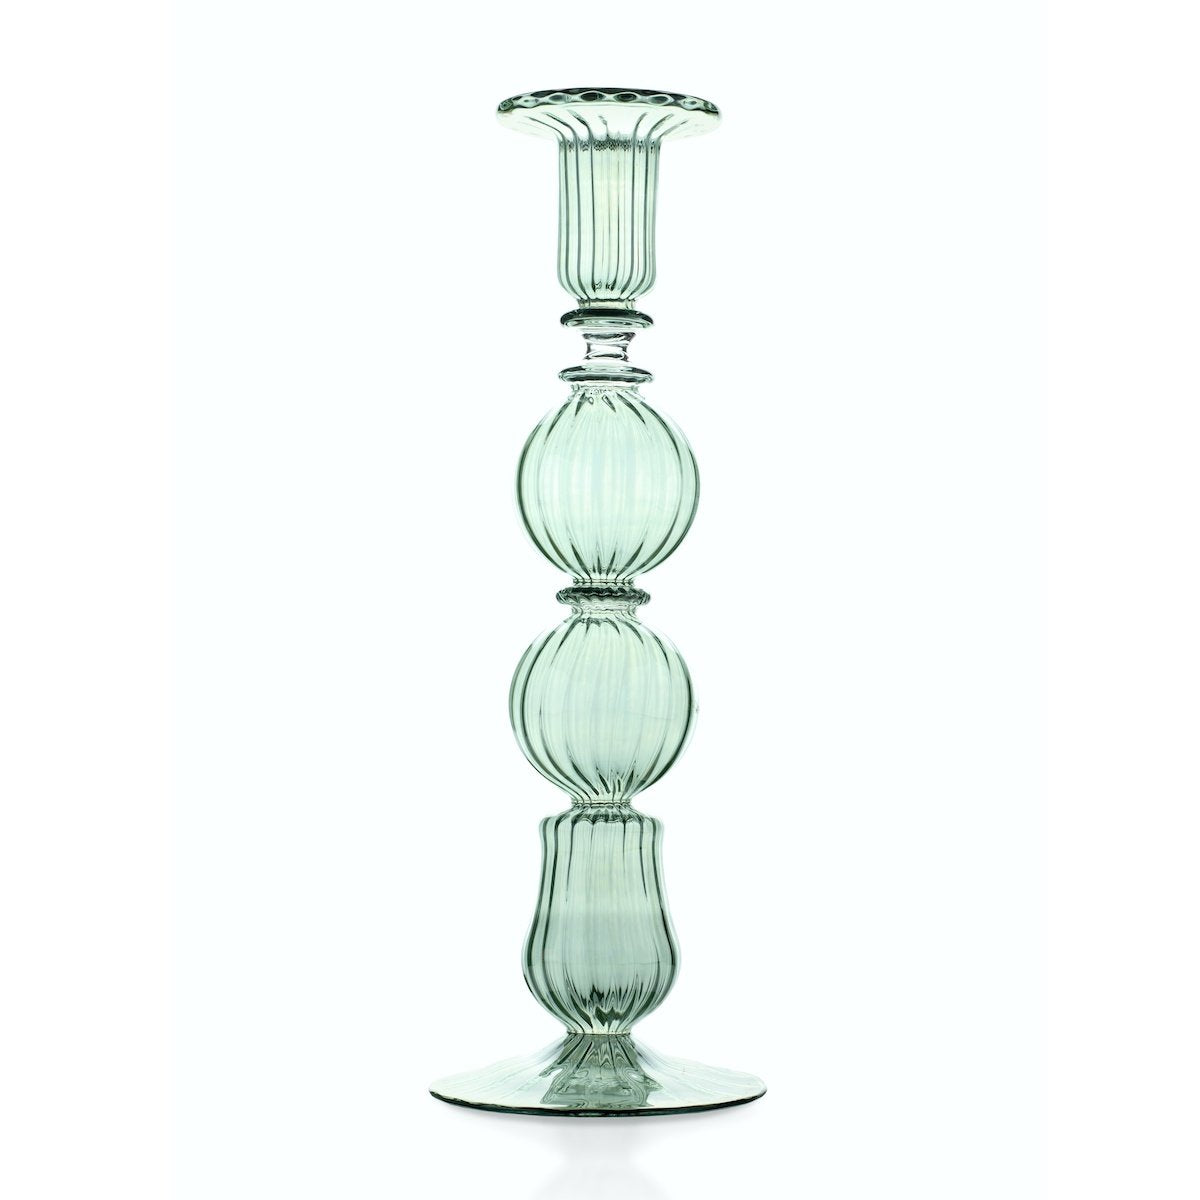 Issy Granger Green Glass Candlestick Candle Holder